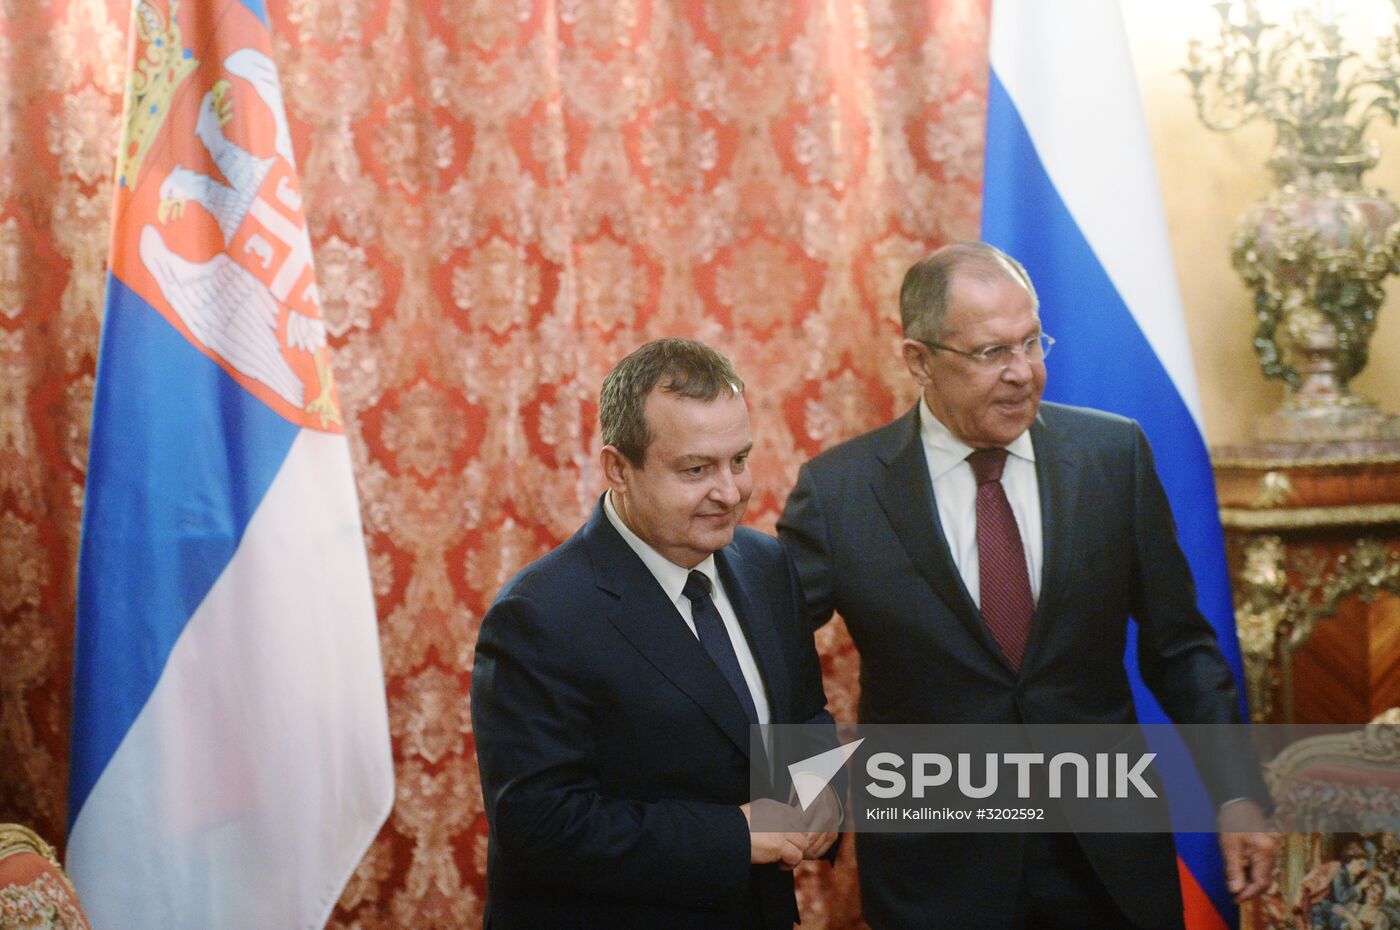 Russian Foreign Minister Sergei Lavrov meets with Serbian counterpart, Ivica Dacic